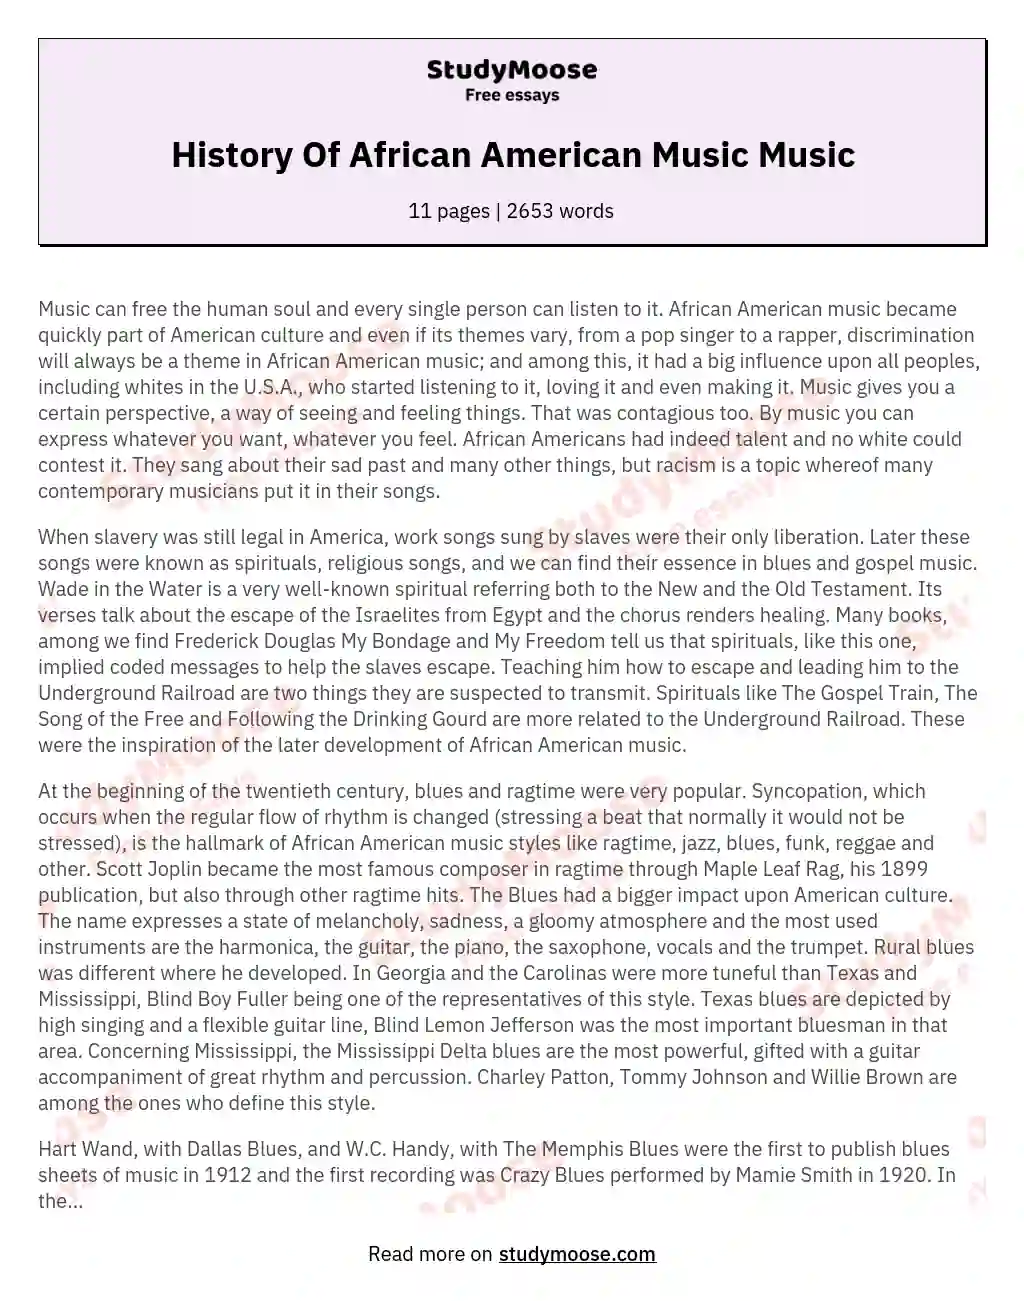 History Of African American Music Music